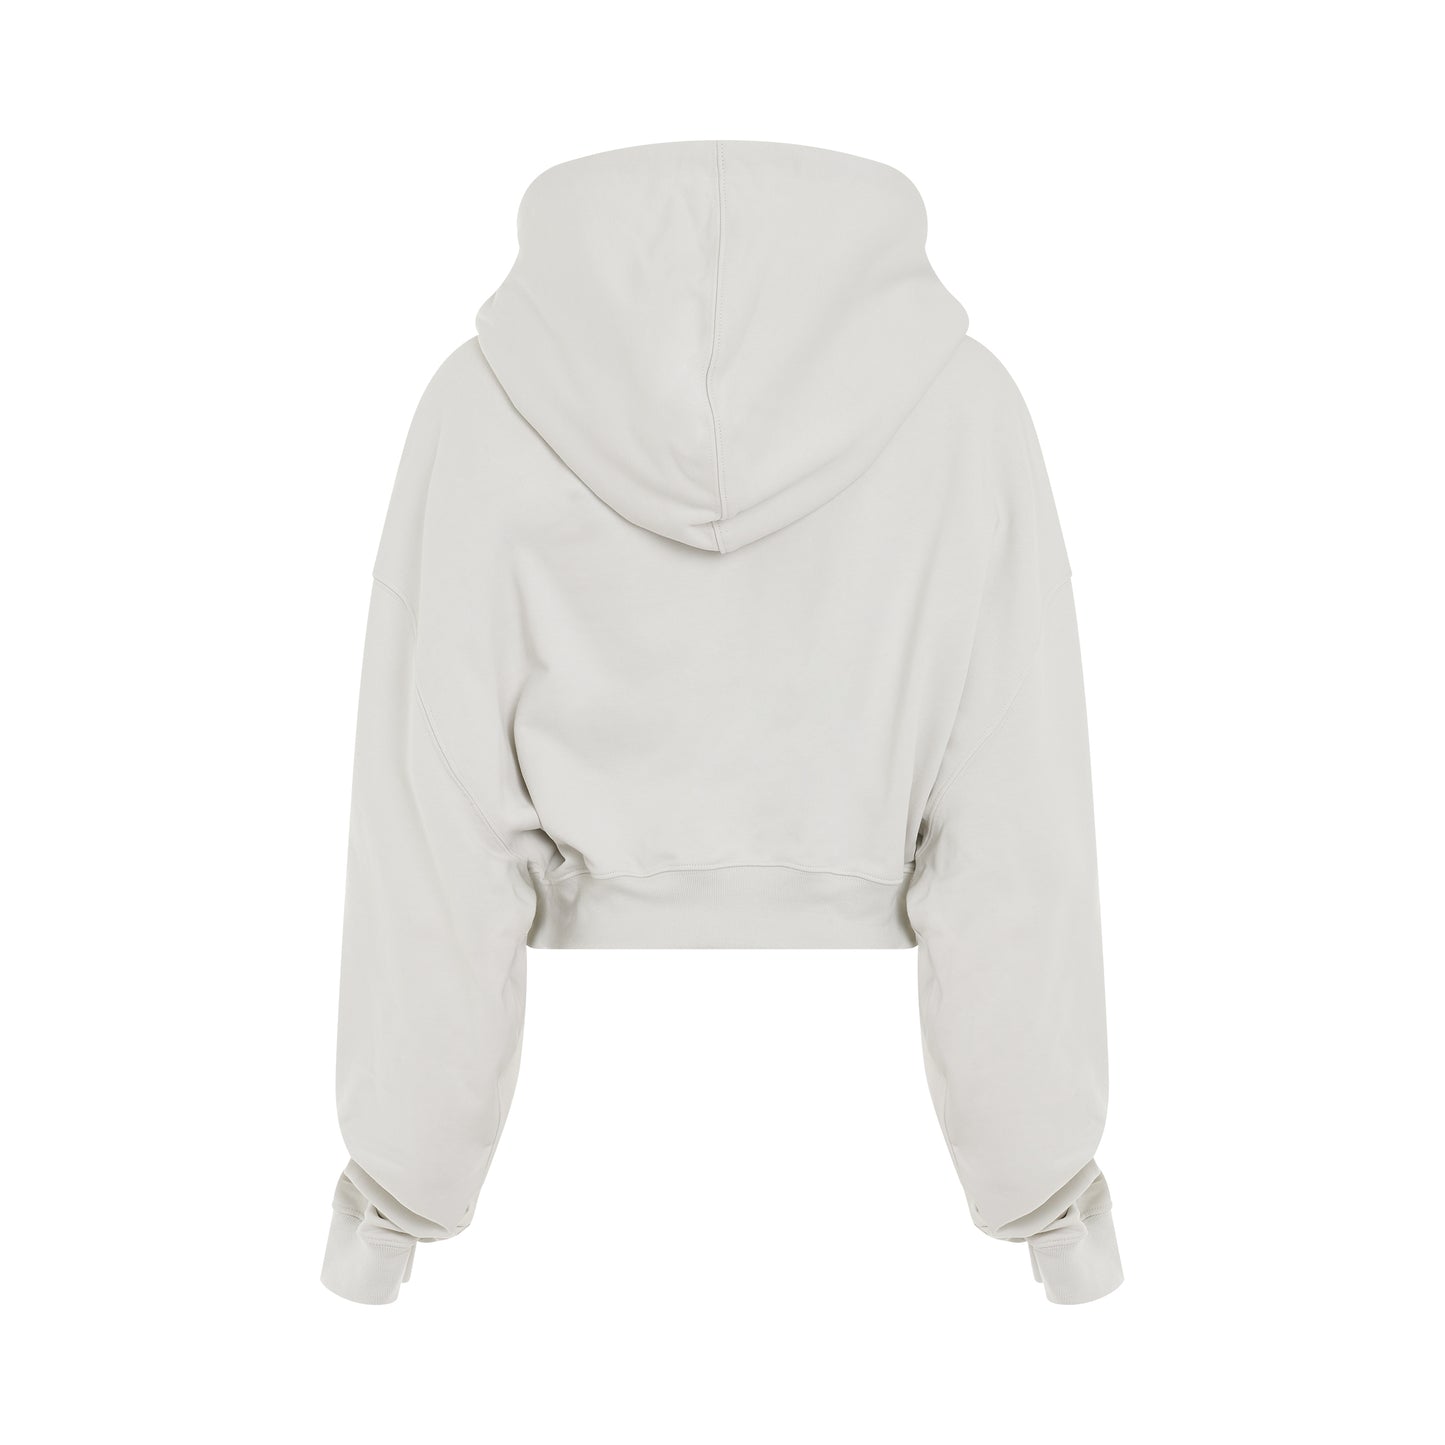 For All Helvetica Crop Oversize Hoodie in White/Black